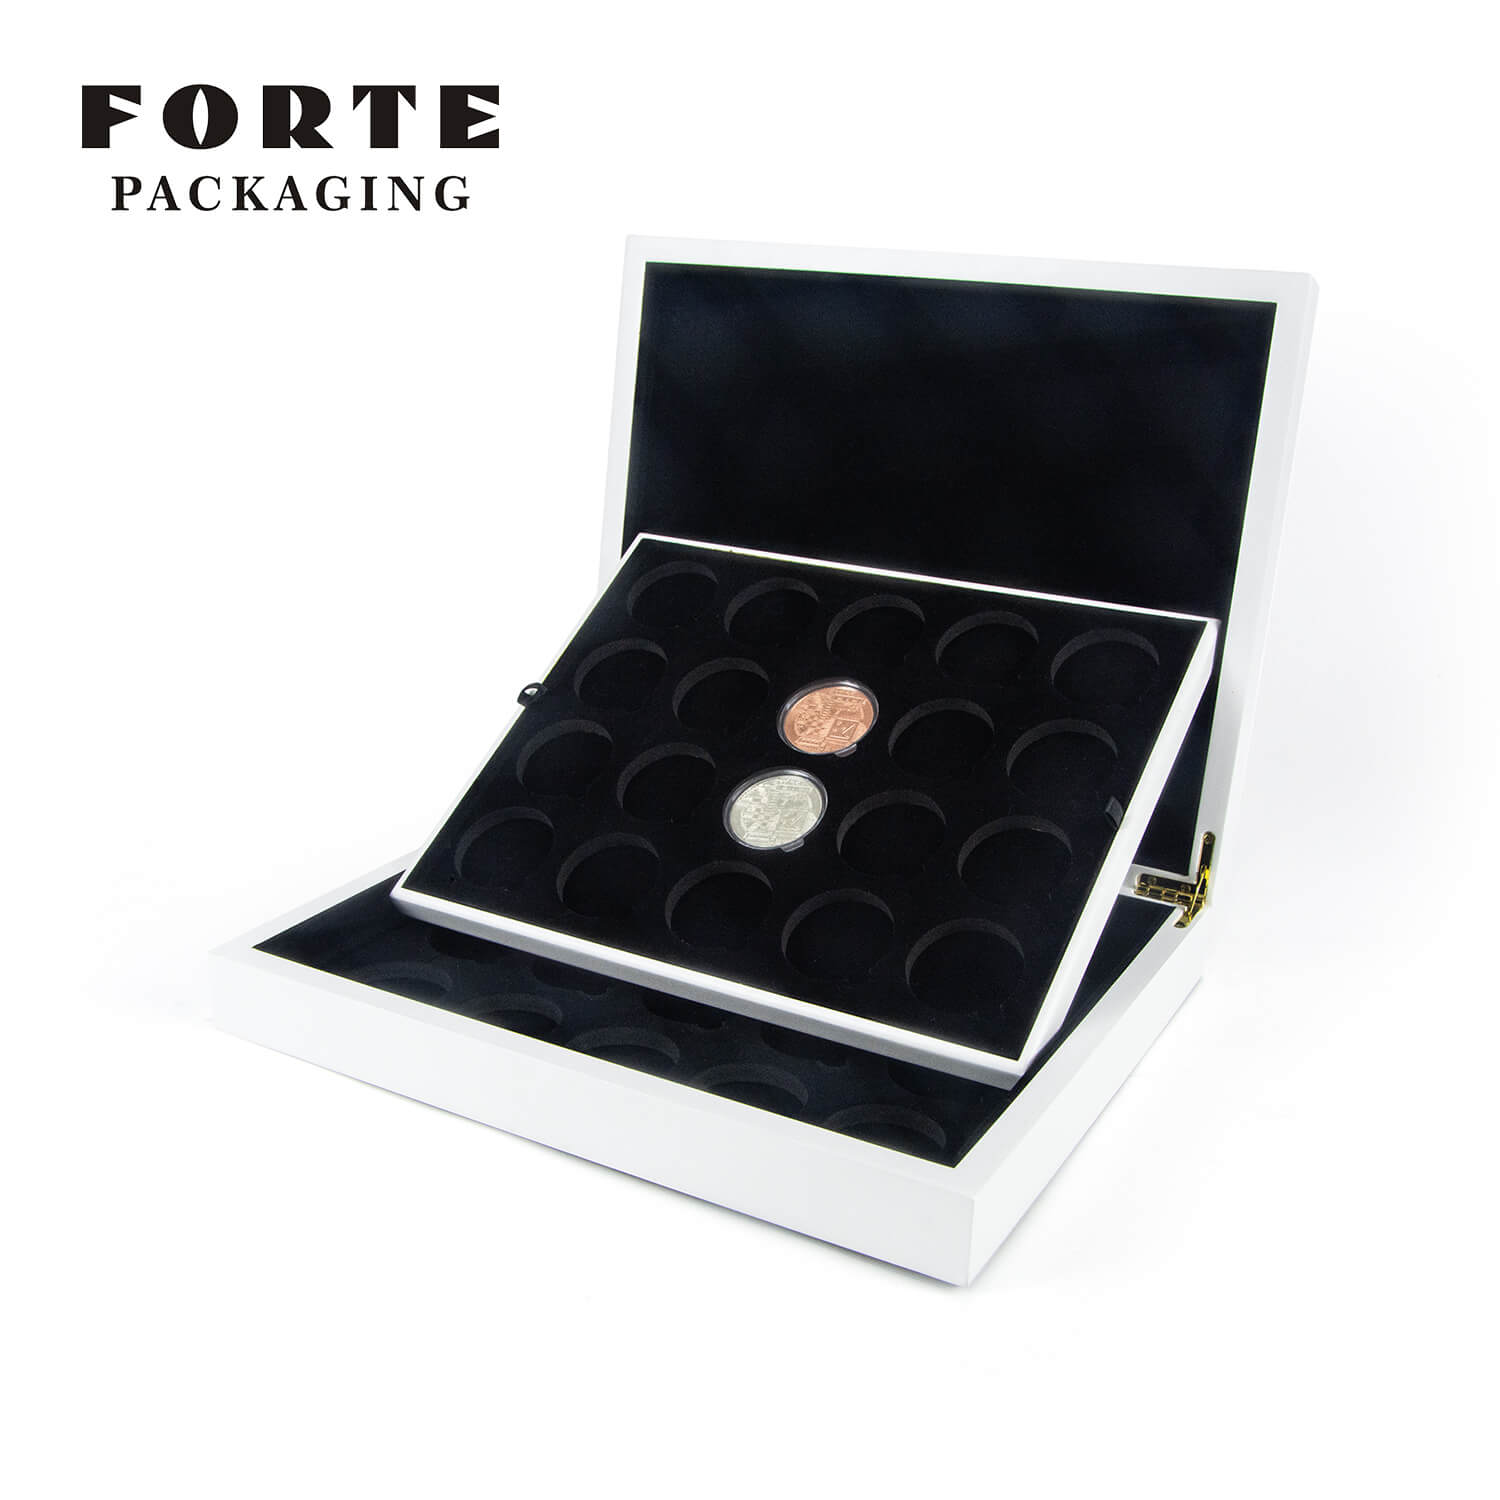 Commemorative Coin Collection Boxes Wood Double-deck Sliver Coin Box Potable Travel Coin Packaging Boxes